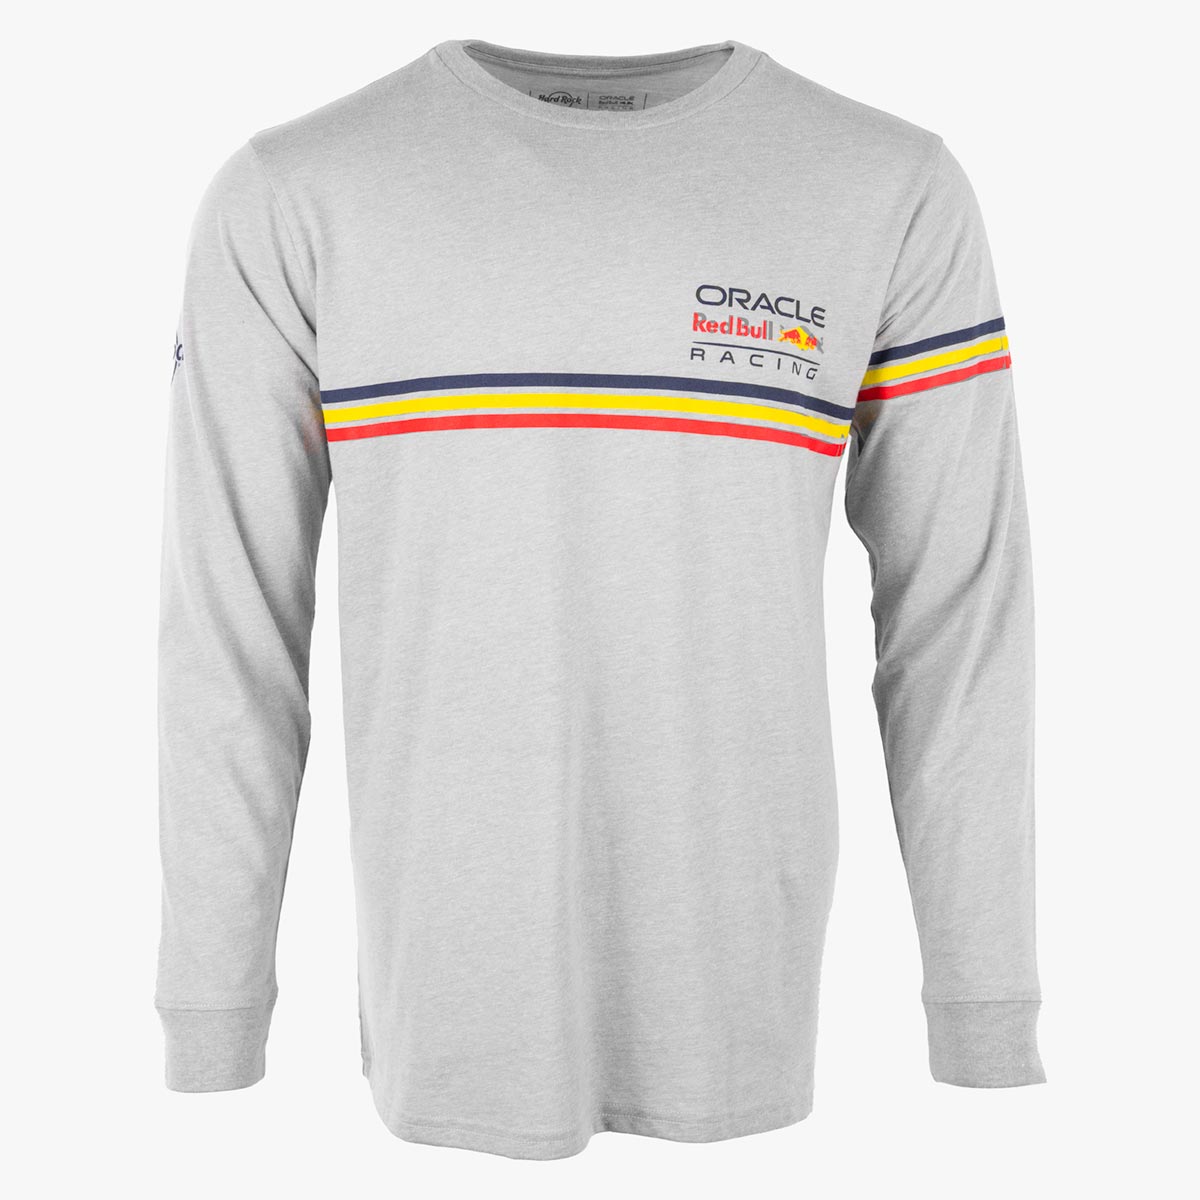 Oracle Red Bull Longsleeve Crewneck Tee with Racer Stripes image number 1